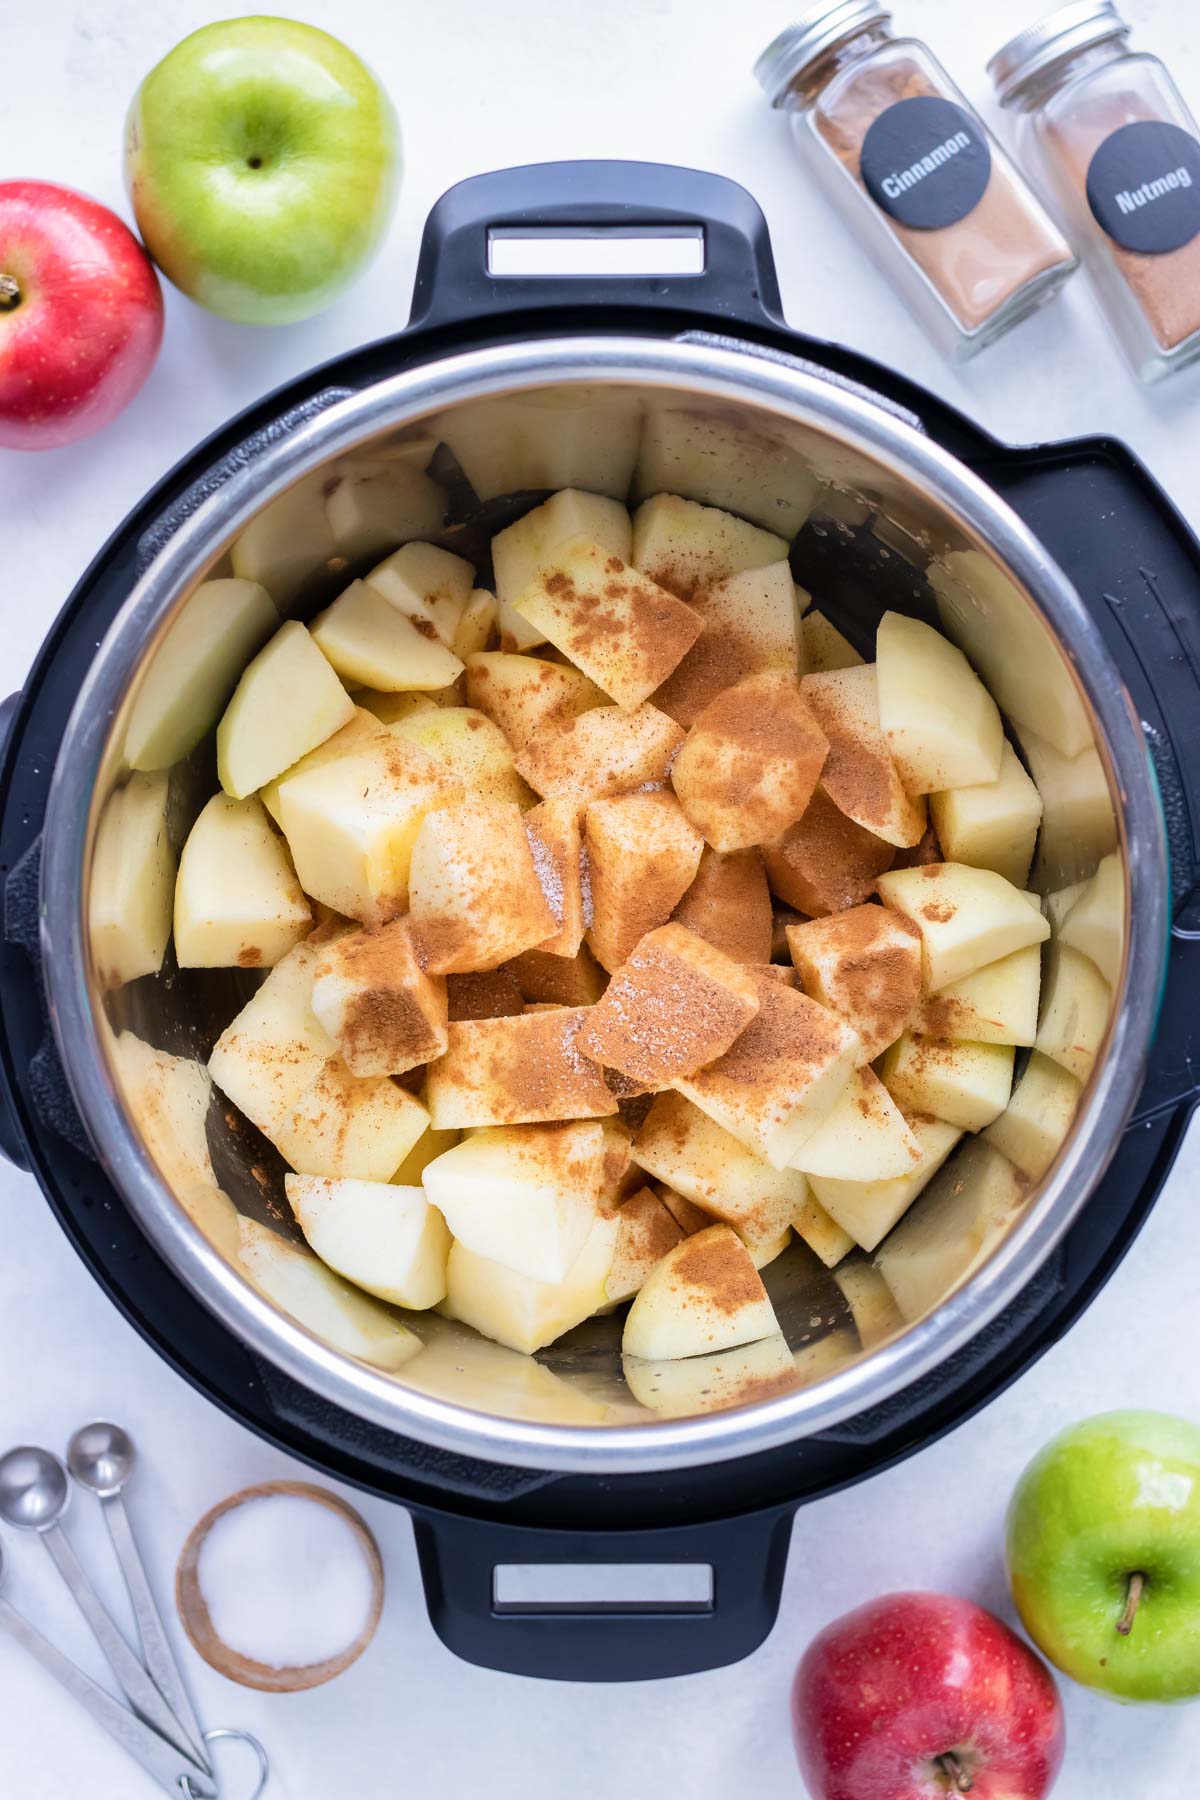 Cubed apples, spices, water, and lemon juice are added to the pressure cooker.